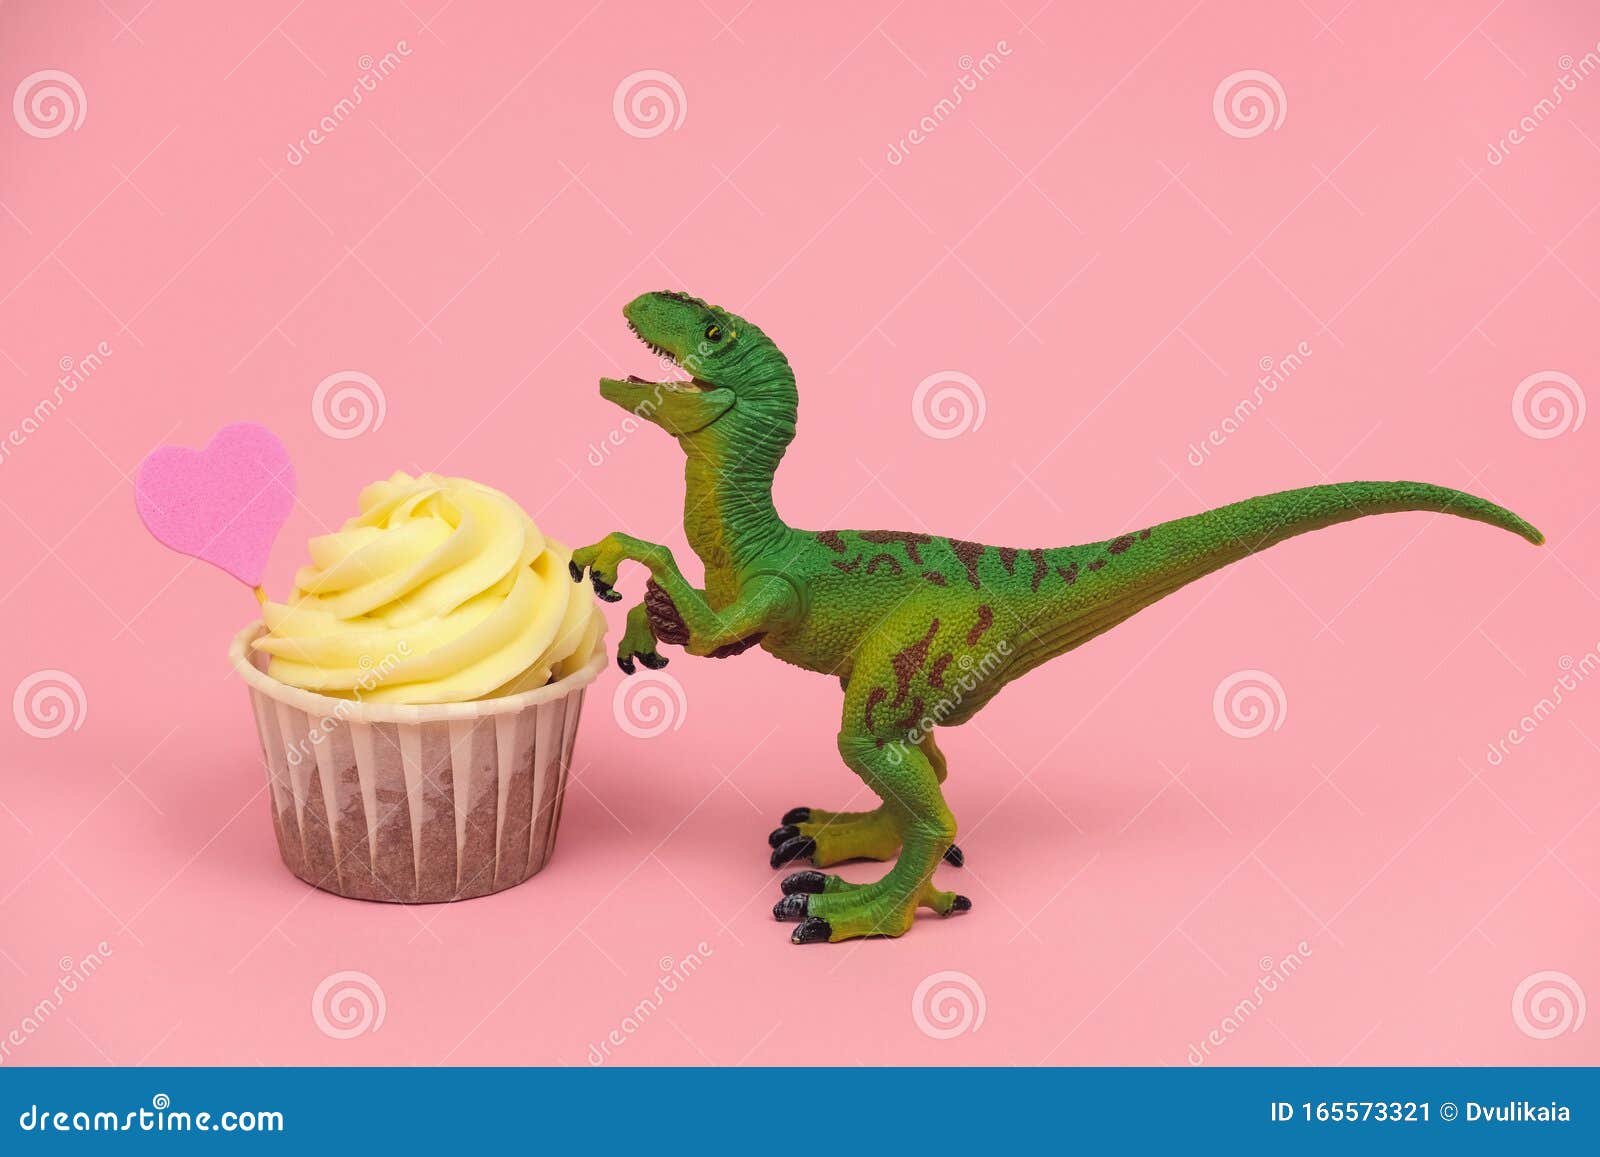 Green Plastic Dinosaur Toywith Cupkace Decorated With Pink Heart On A Pastel Pink Background Stock Image Image Of Coffee Greeting 165573321 Feel free to download, share, comment and discuss every wallpaper you like. dreamstime com